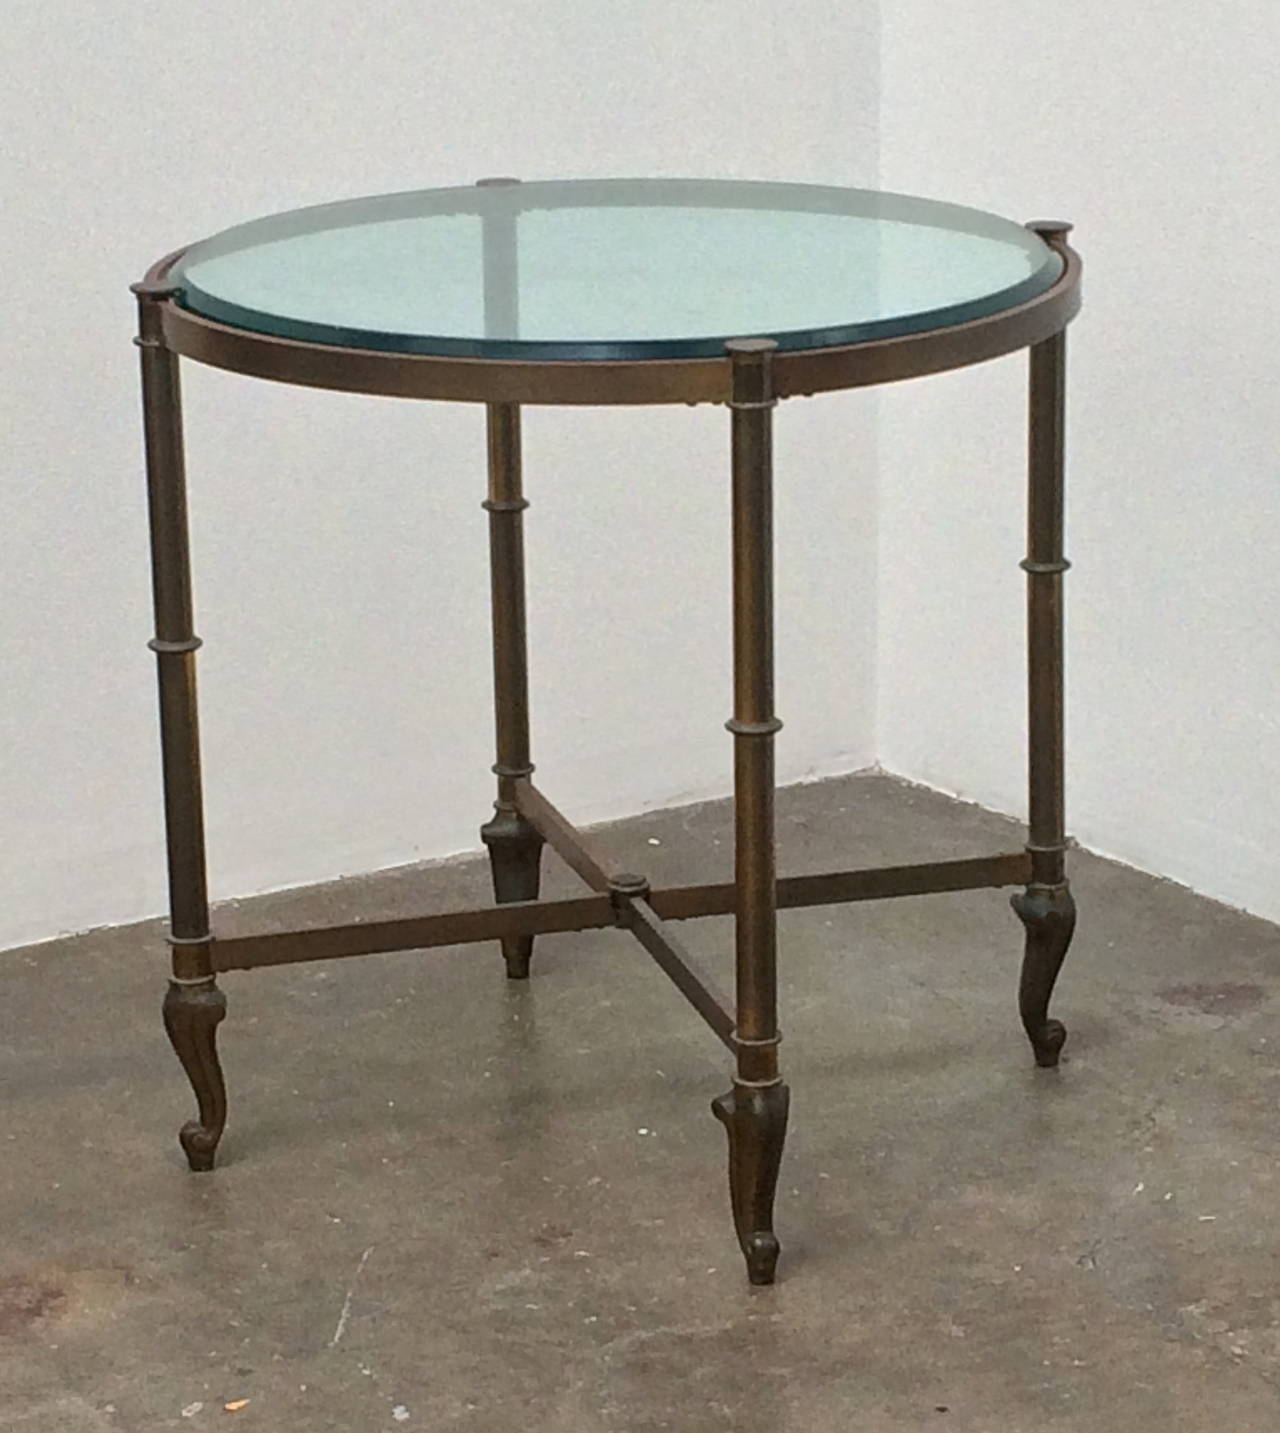 Circular table in the manner of La Barge
Circa 1950
brass, sloped, bevelled glass top
25.5 in diameter
24 inches high
Very good condition